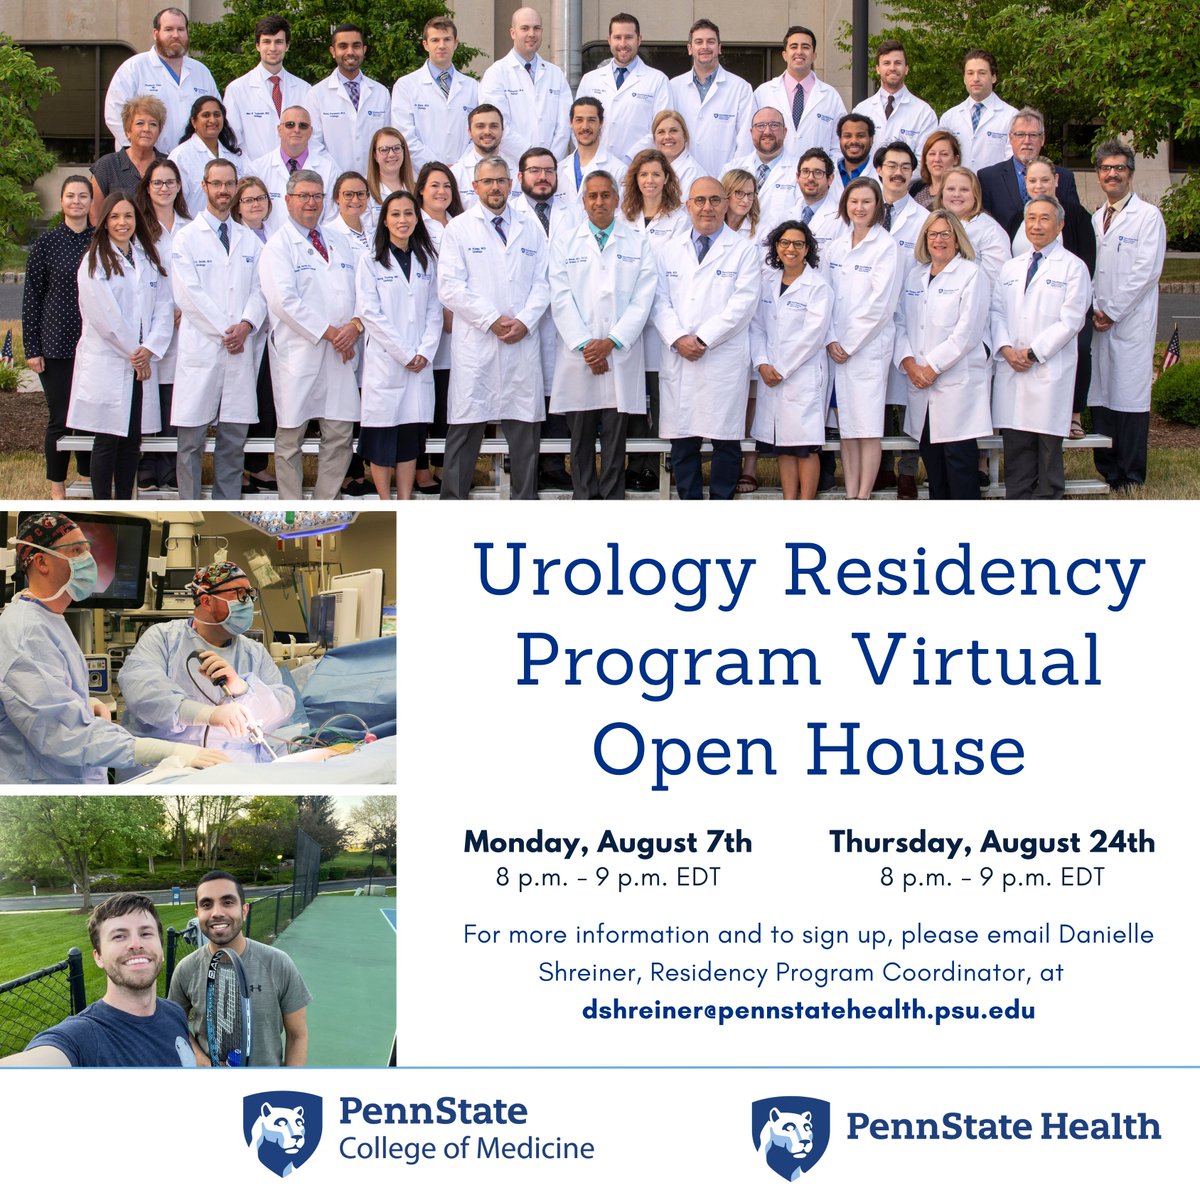 Learn more about the Urology Residency Program at @PennStHershey during one of our virtual open houses! For more information and to sign up, please email Danielle Shreiner, Residency Program Coordinator, at dshreiner@pennstatehealth.psu.edu #urology #Match2024 #UroSoMe